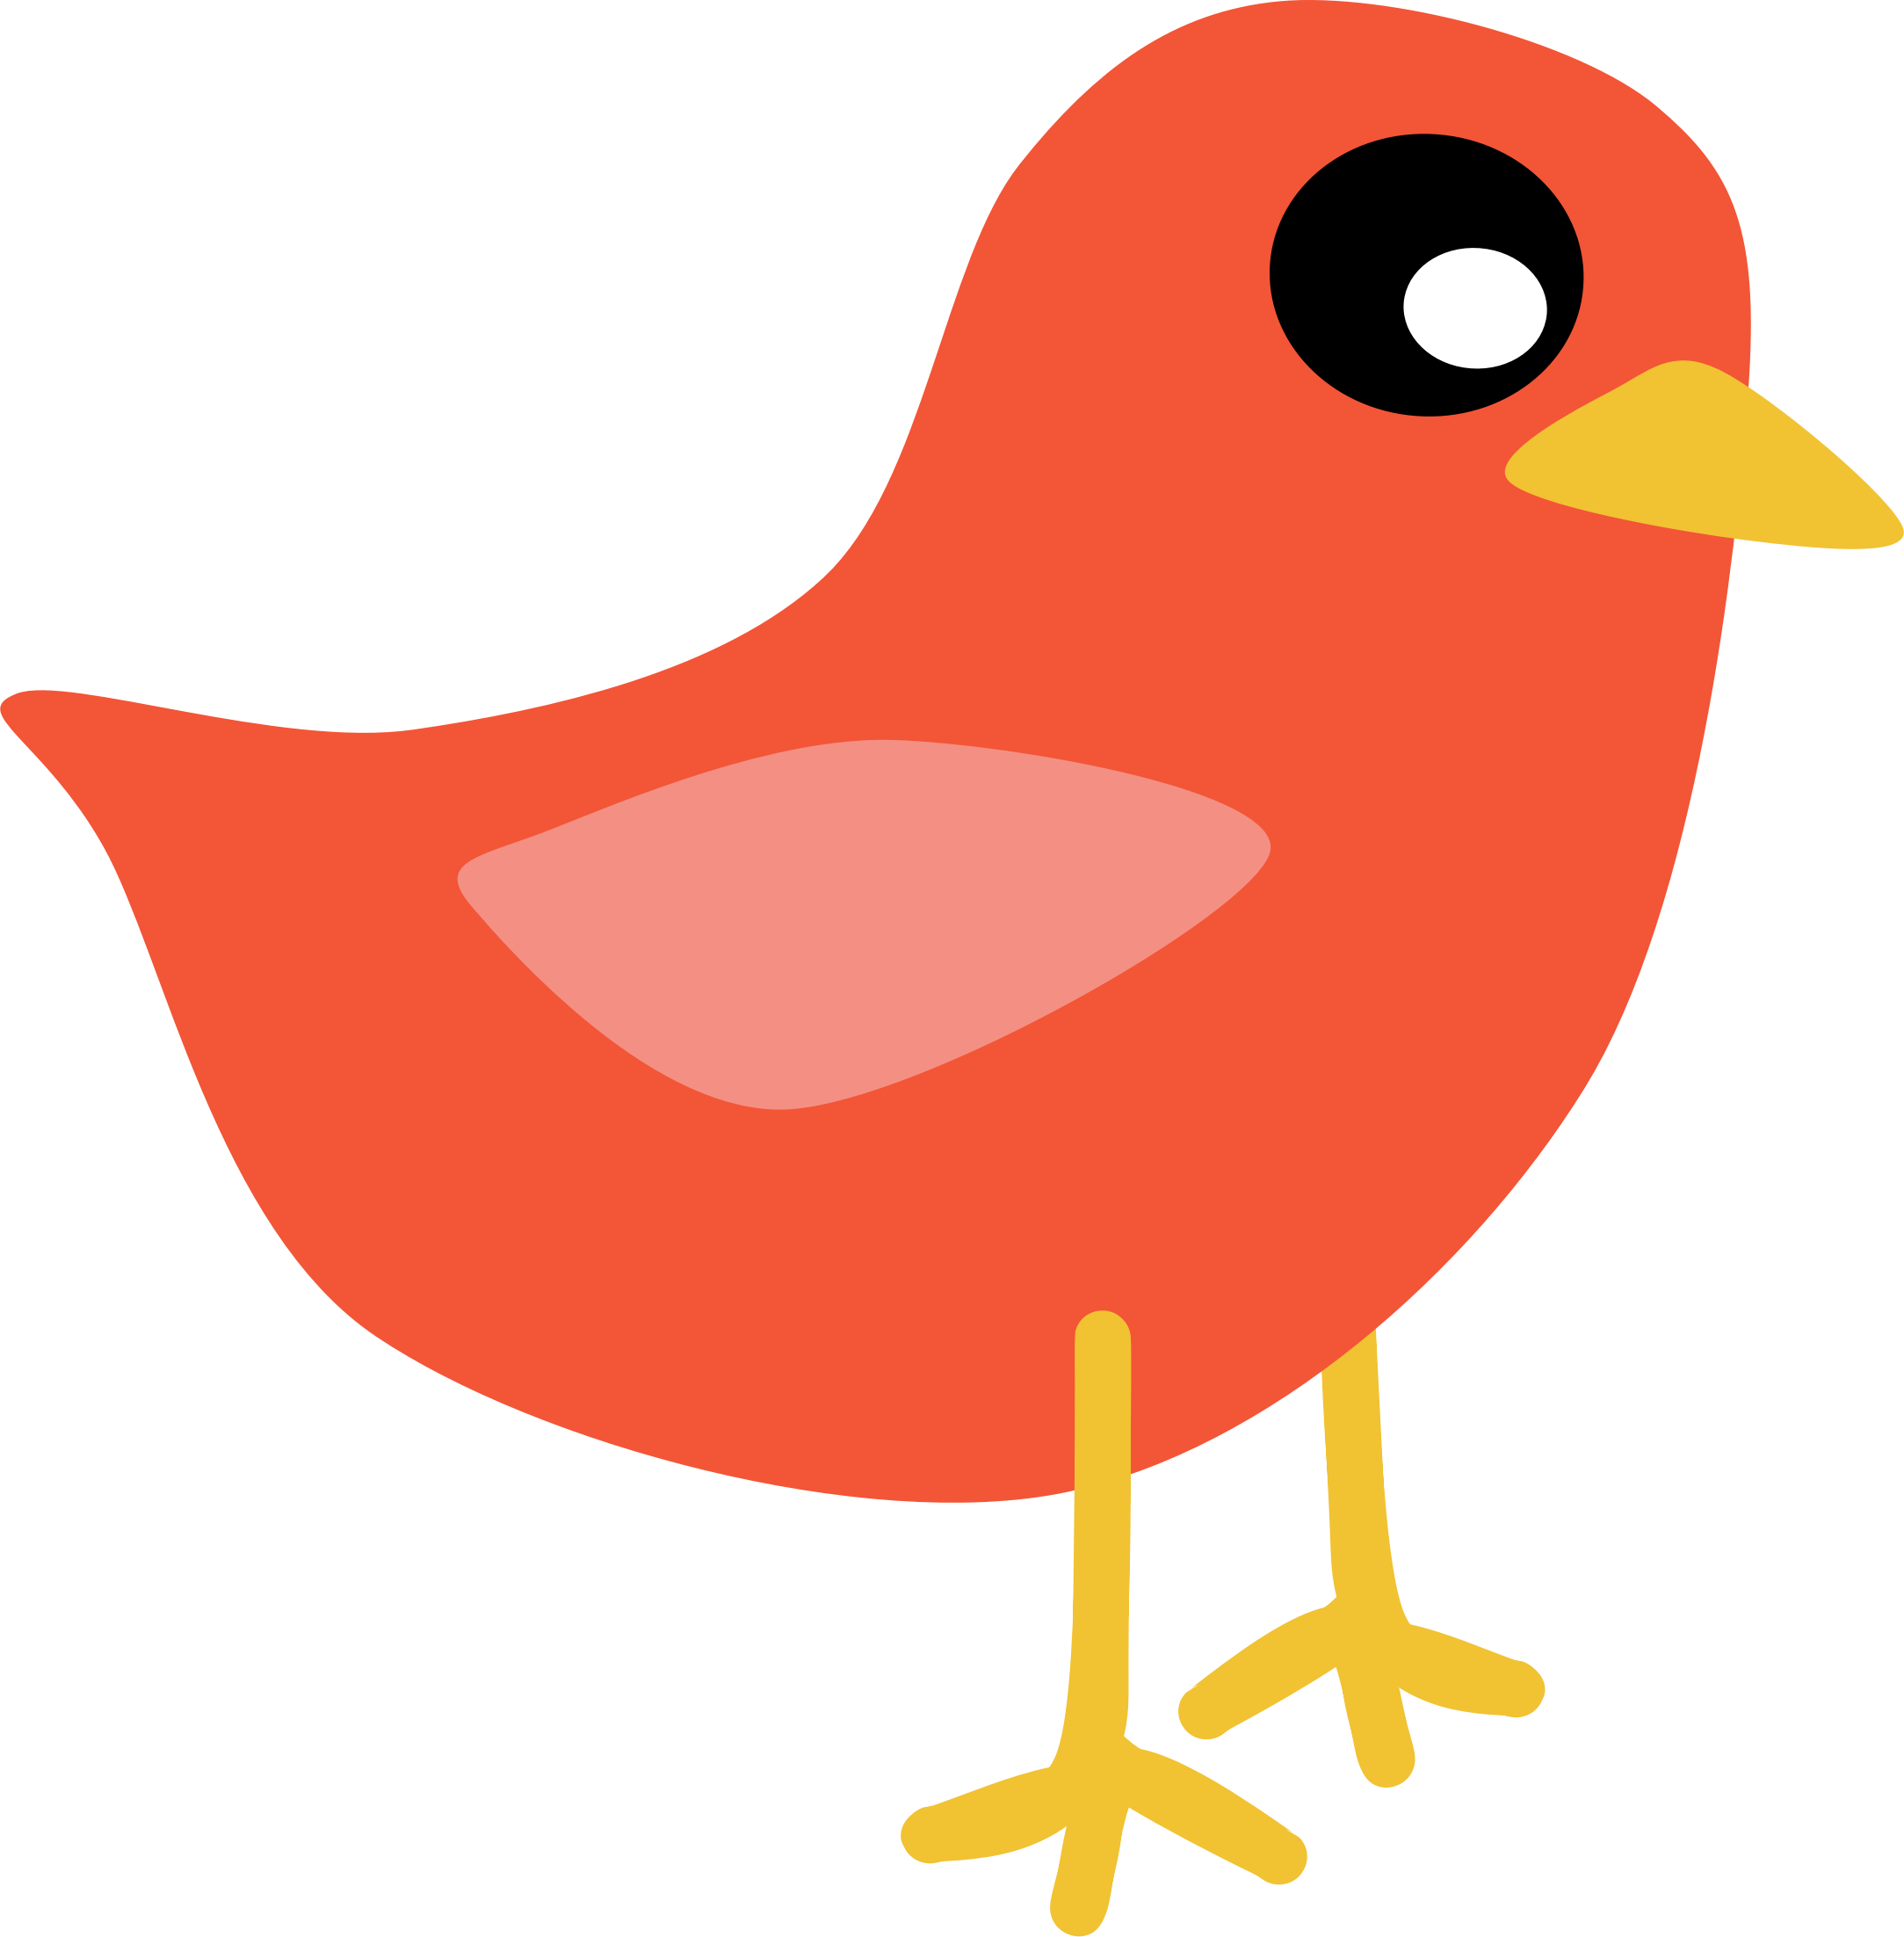 Red Bird By Scout